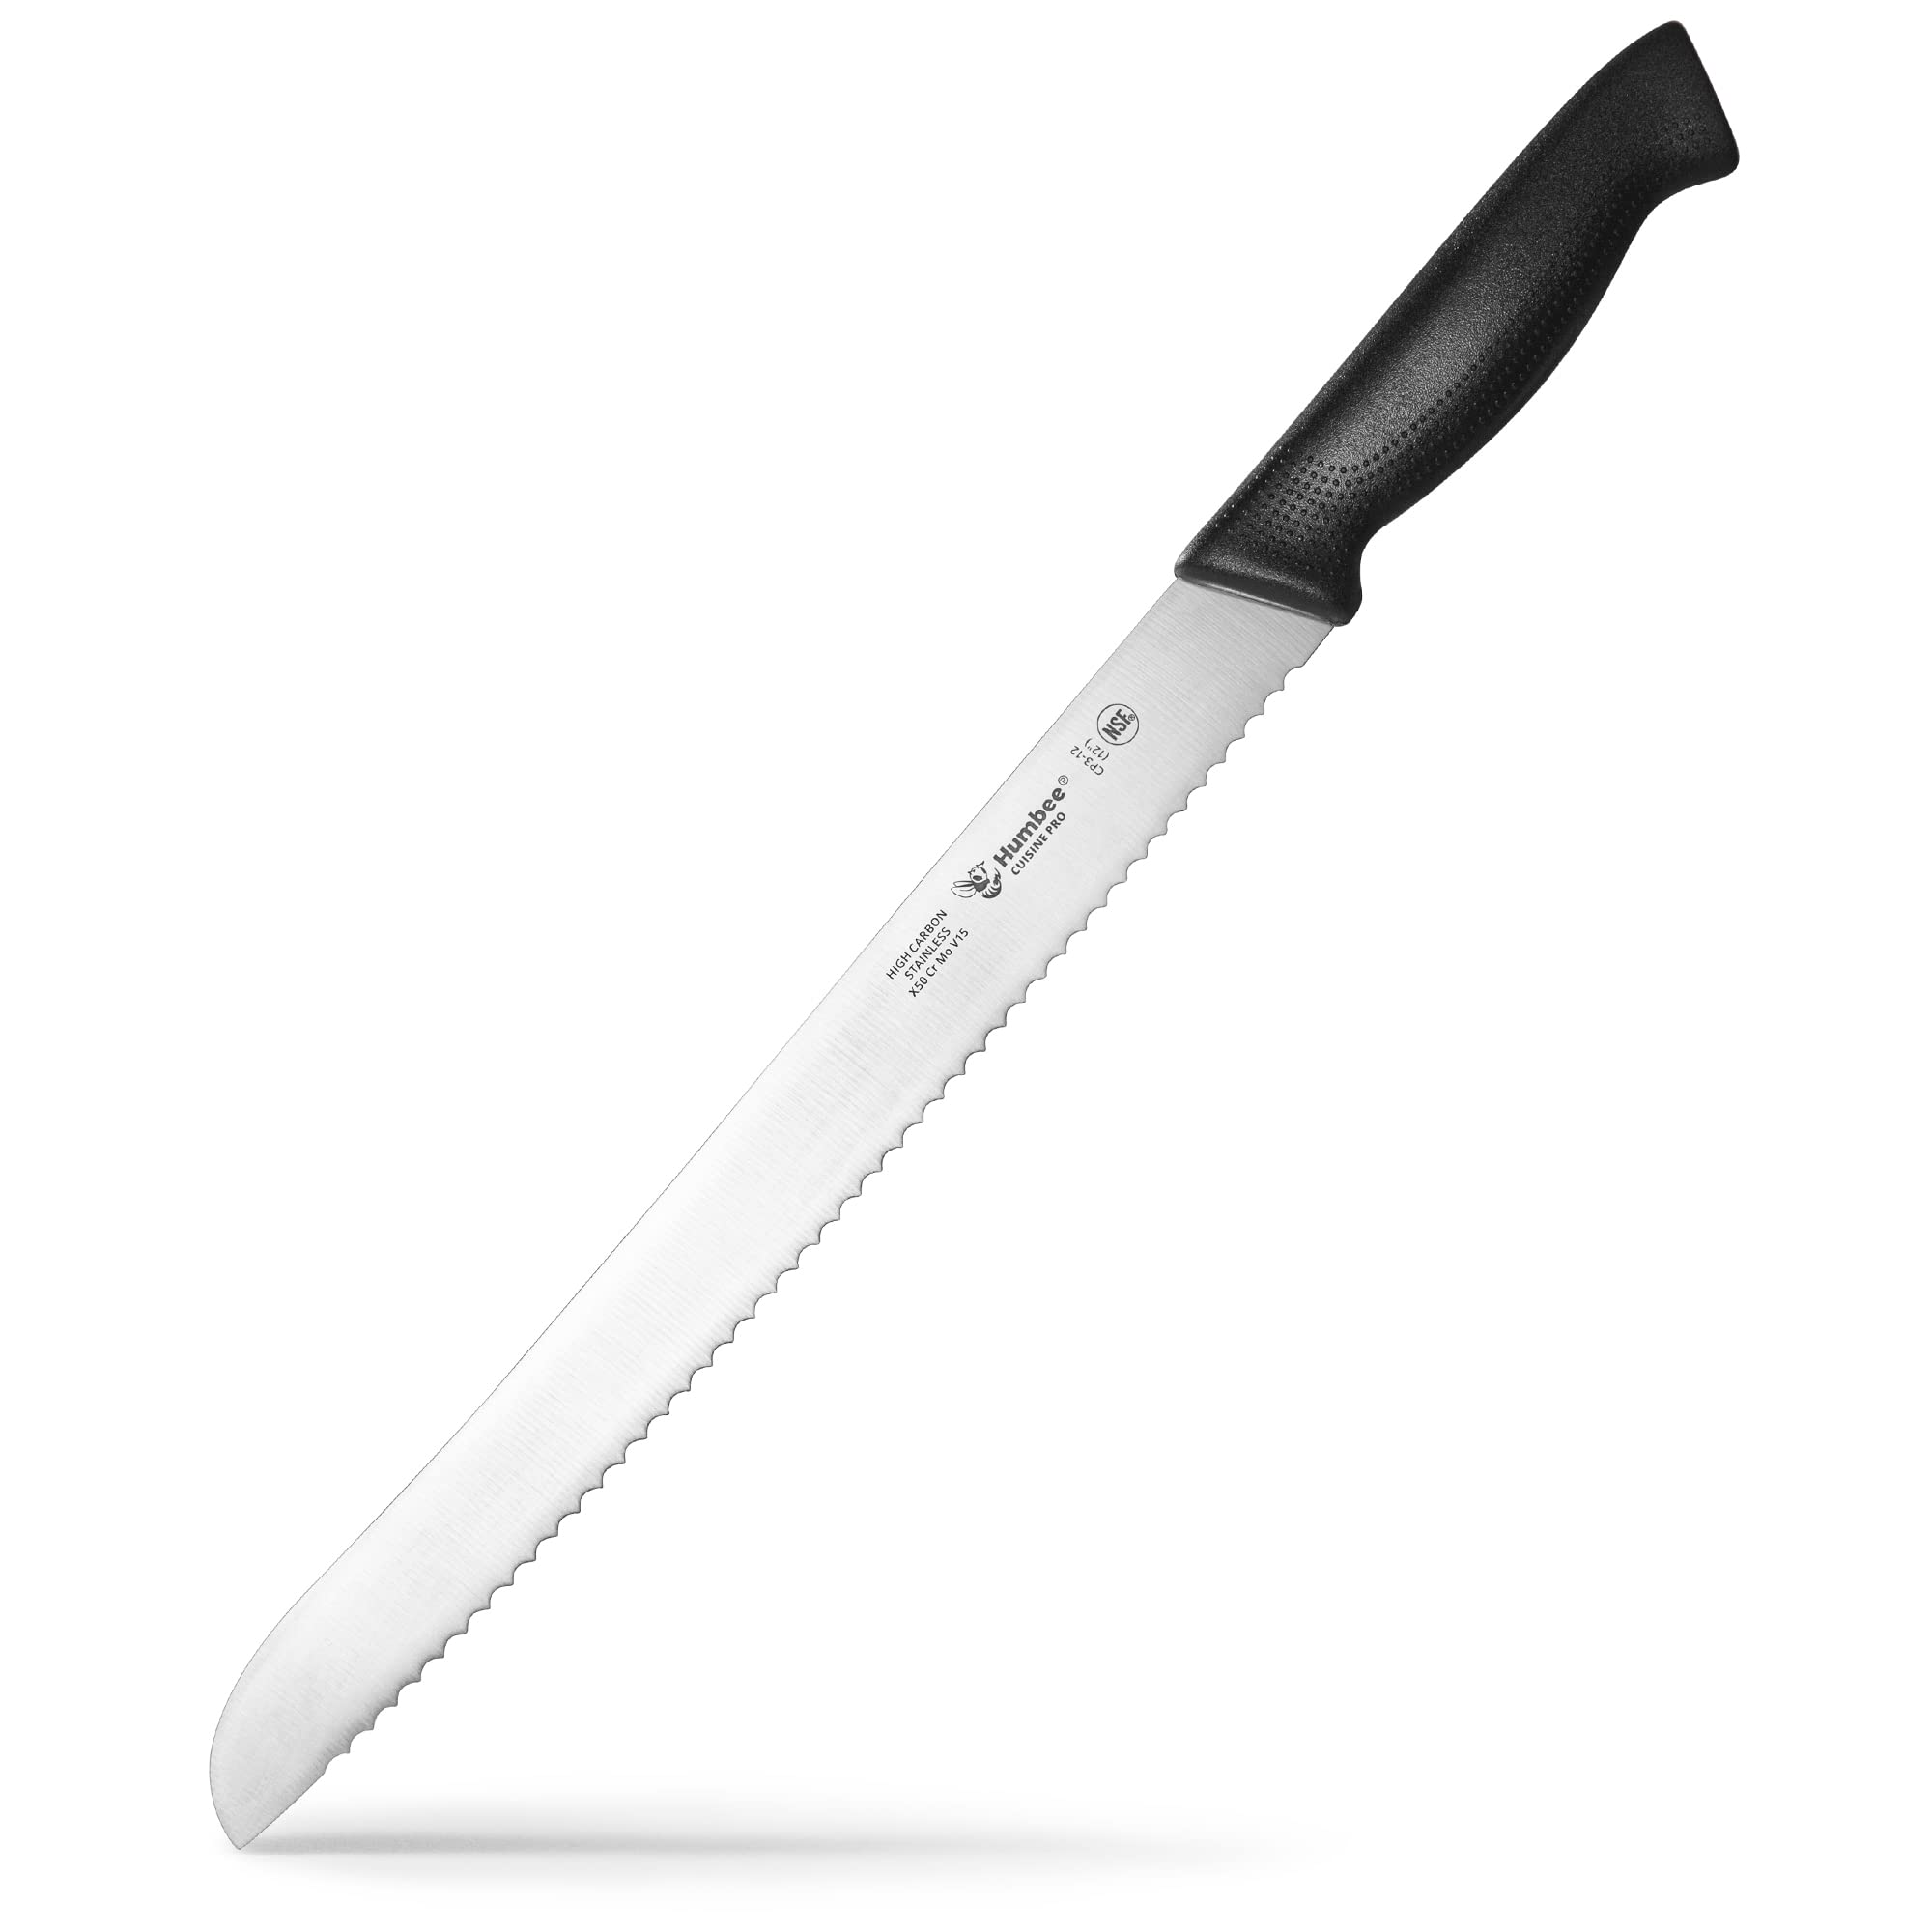 Humbee chef, Serrated Bread Knife, cuisine Pro chef, Bread Knife 12 Inch, NSF certified